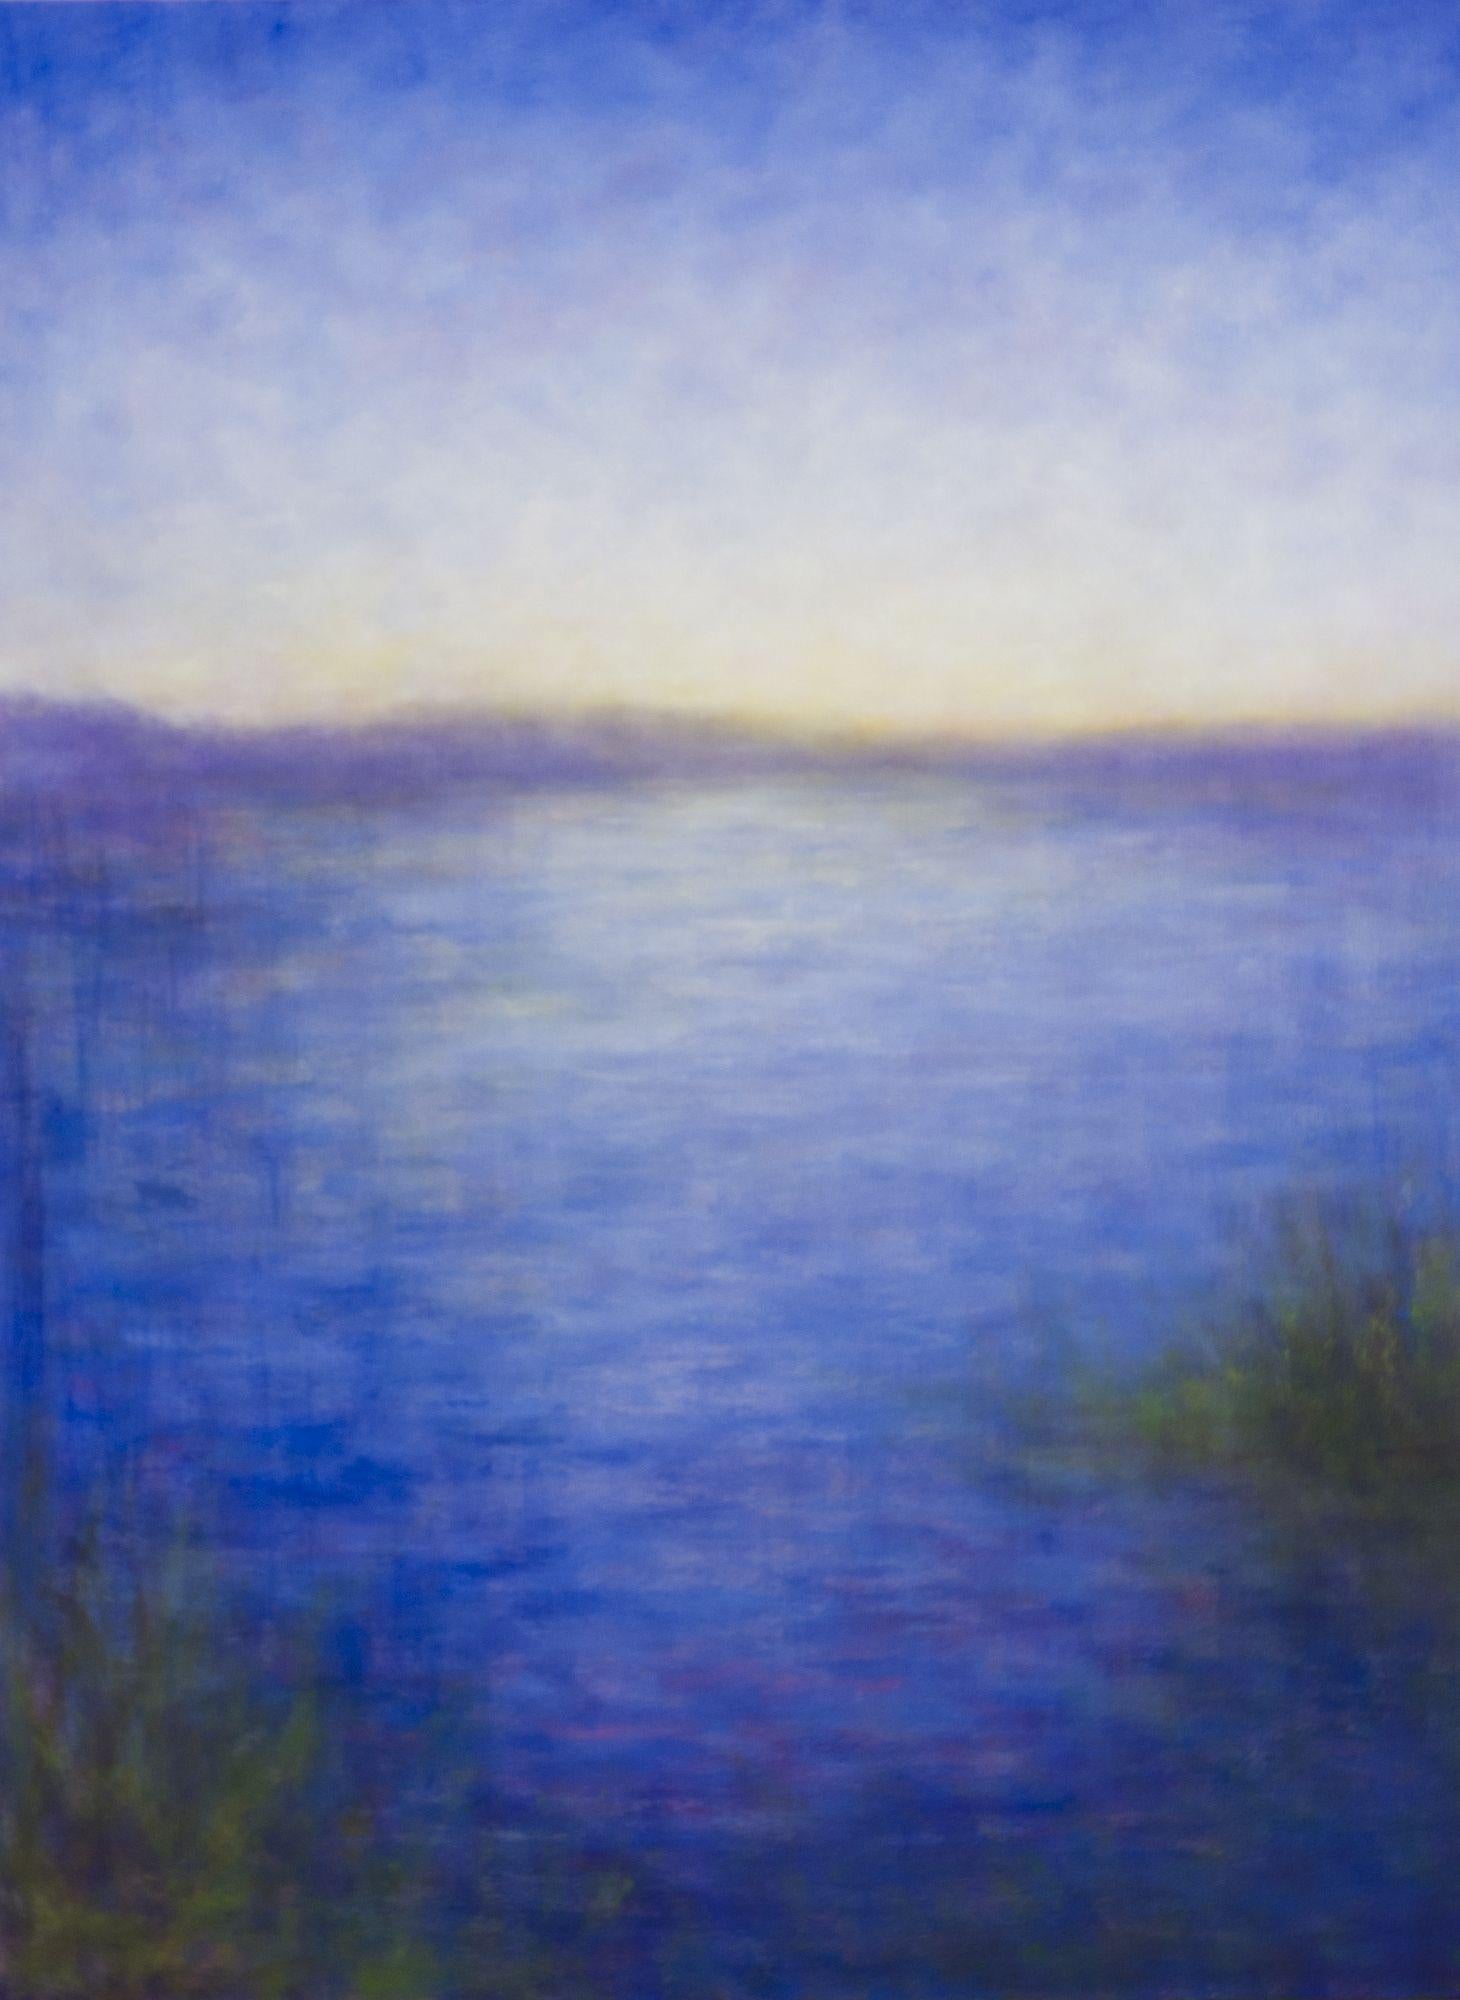 This painting is like a memory of day spent on the beach in Santa Barbara, California.  I was mesmerized by the beautiful blues of the Pacific Ocean standing on the shore looking out at the islands on the horizon.  :: Painting :: Impressionist ::